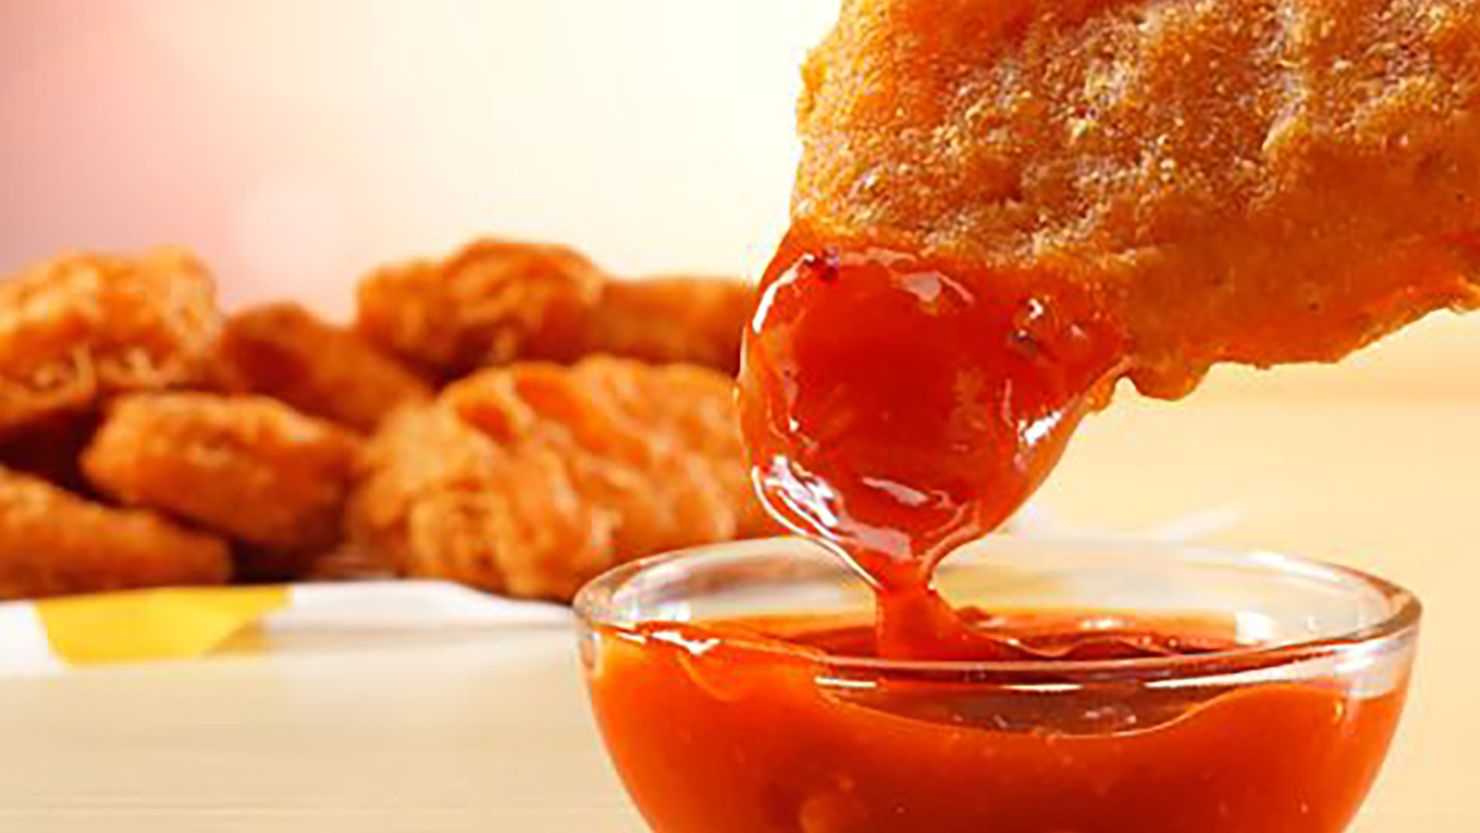 Spicy Chicken McNuggets are back for a limited time.